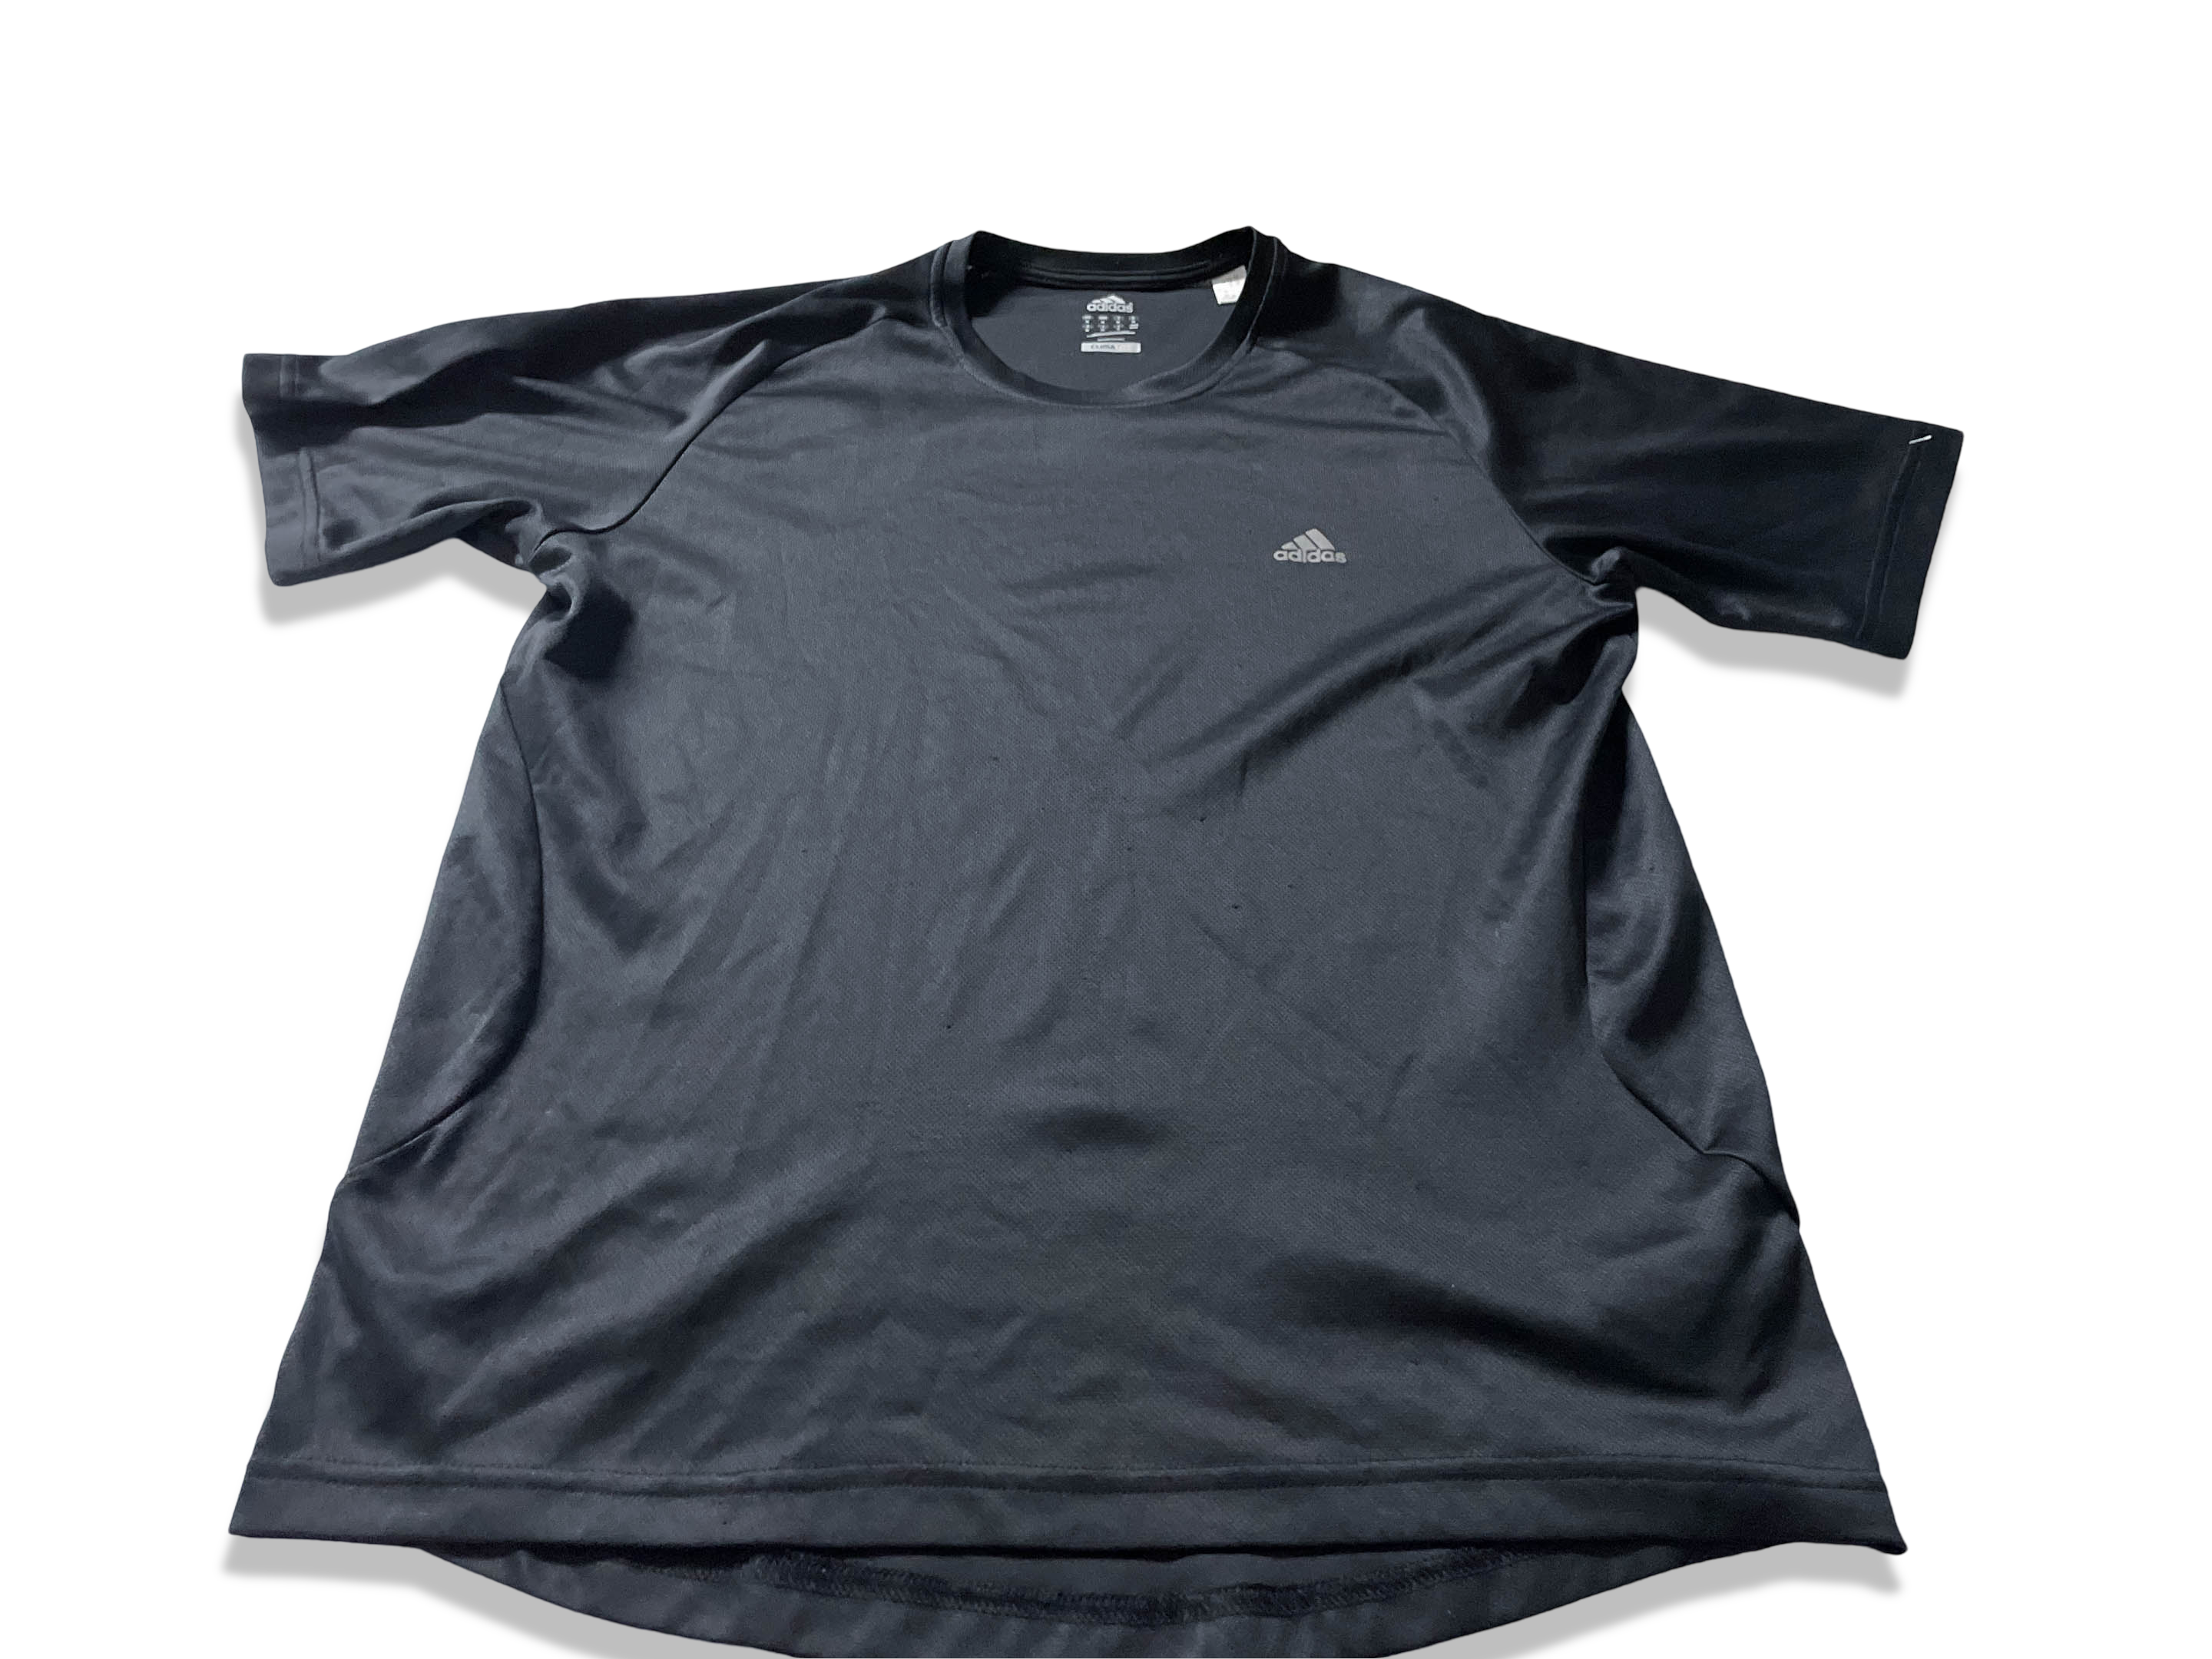 Vintage Men's Black Adidas Climalite training short sleeve tees in M Made in Philippines|L18 W20| SKU 4048